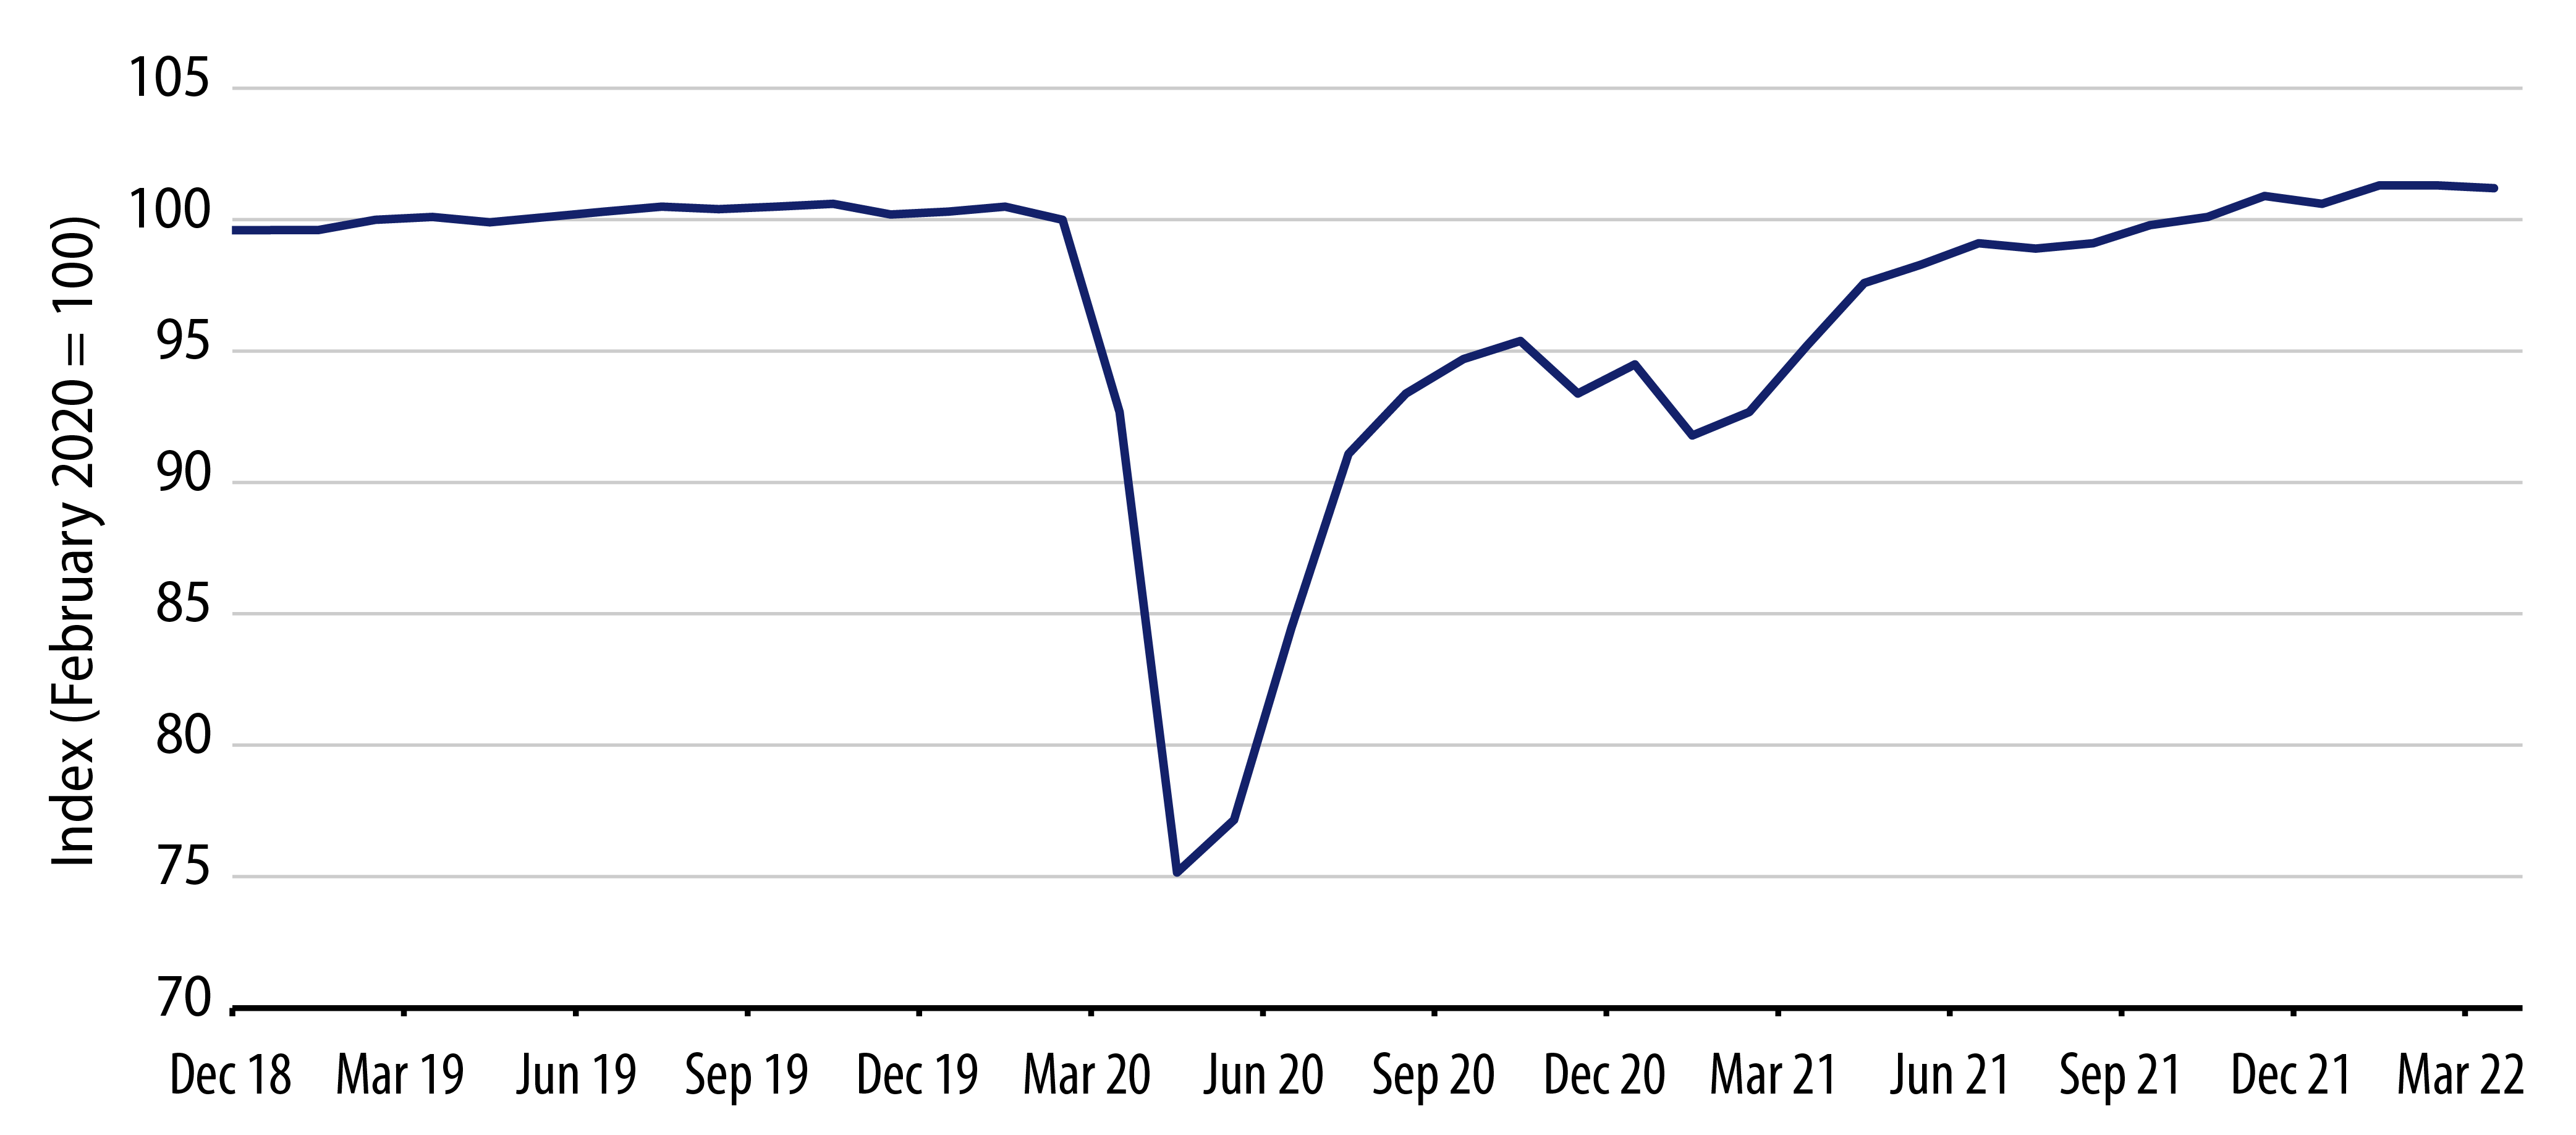 UK Monthly GDP, Rebased to February 2020